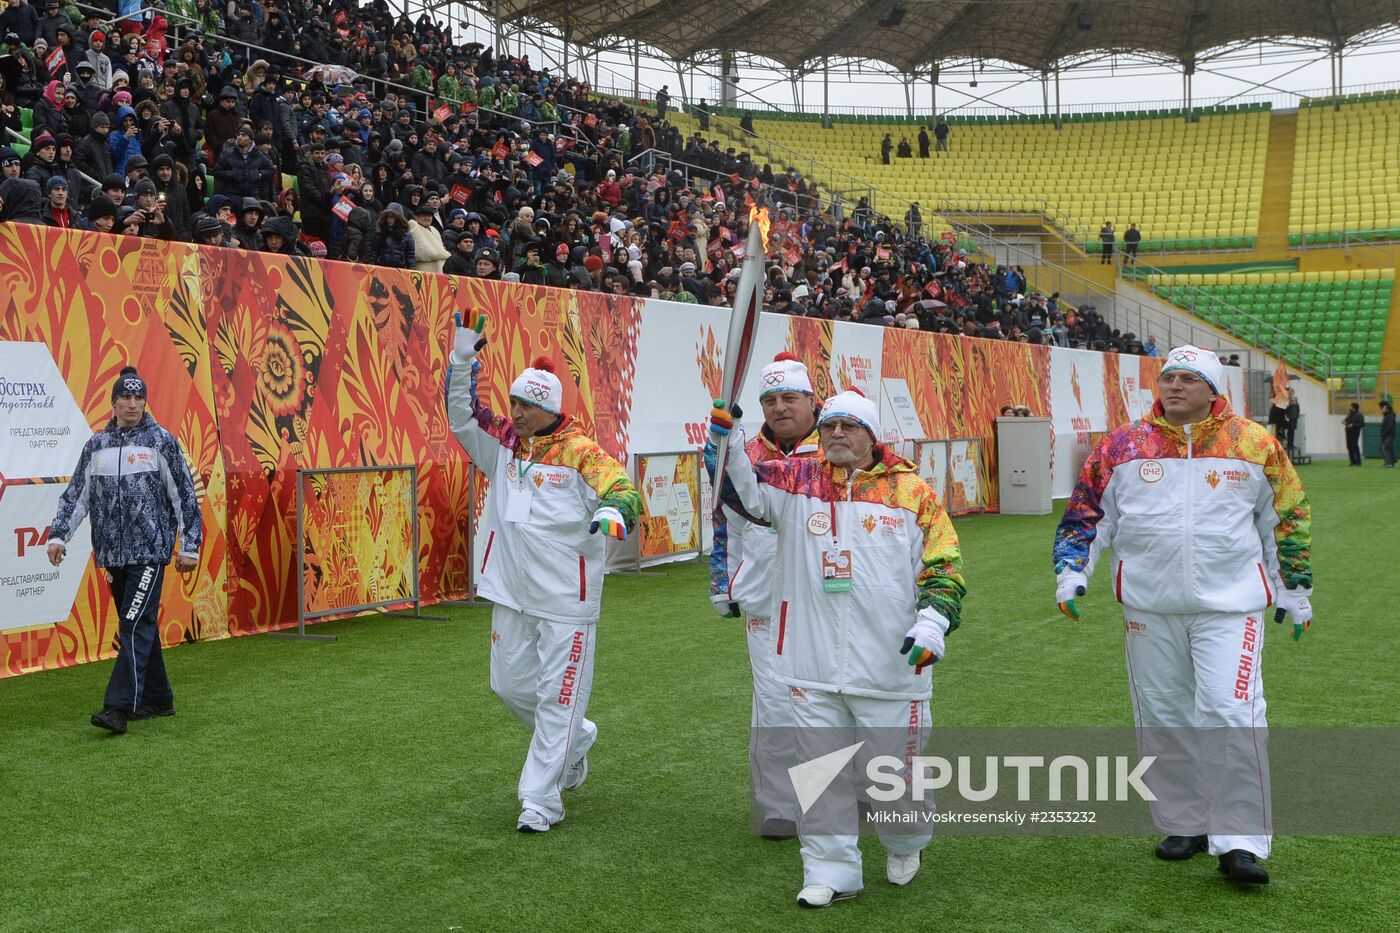 Olympic torch relay. Makhachkala